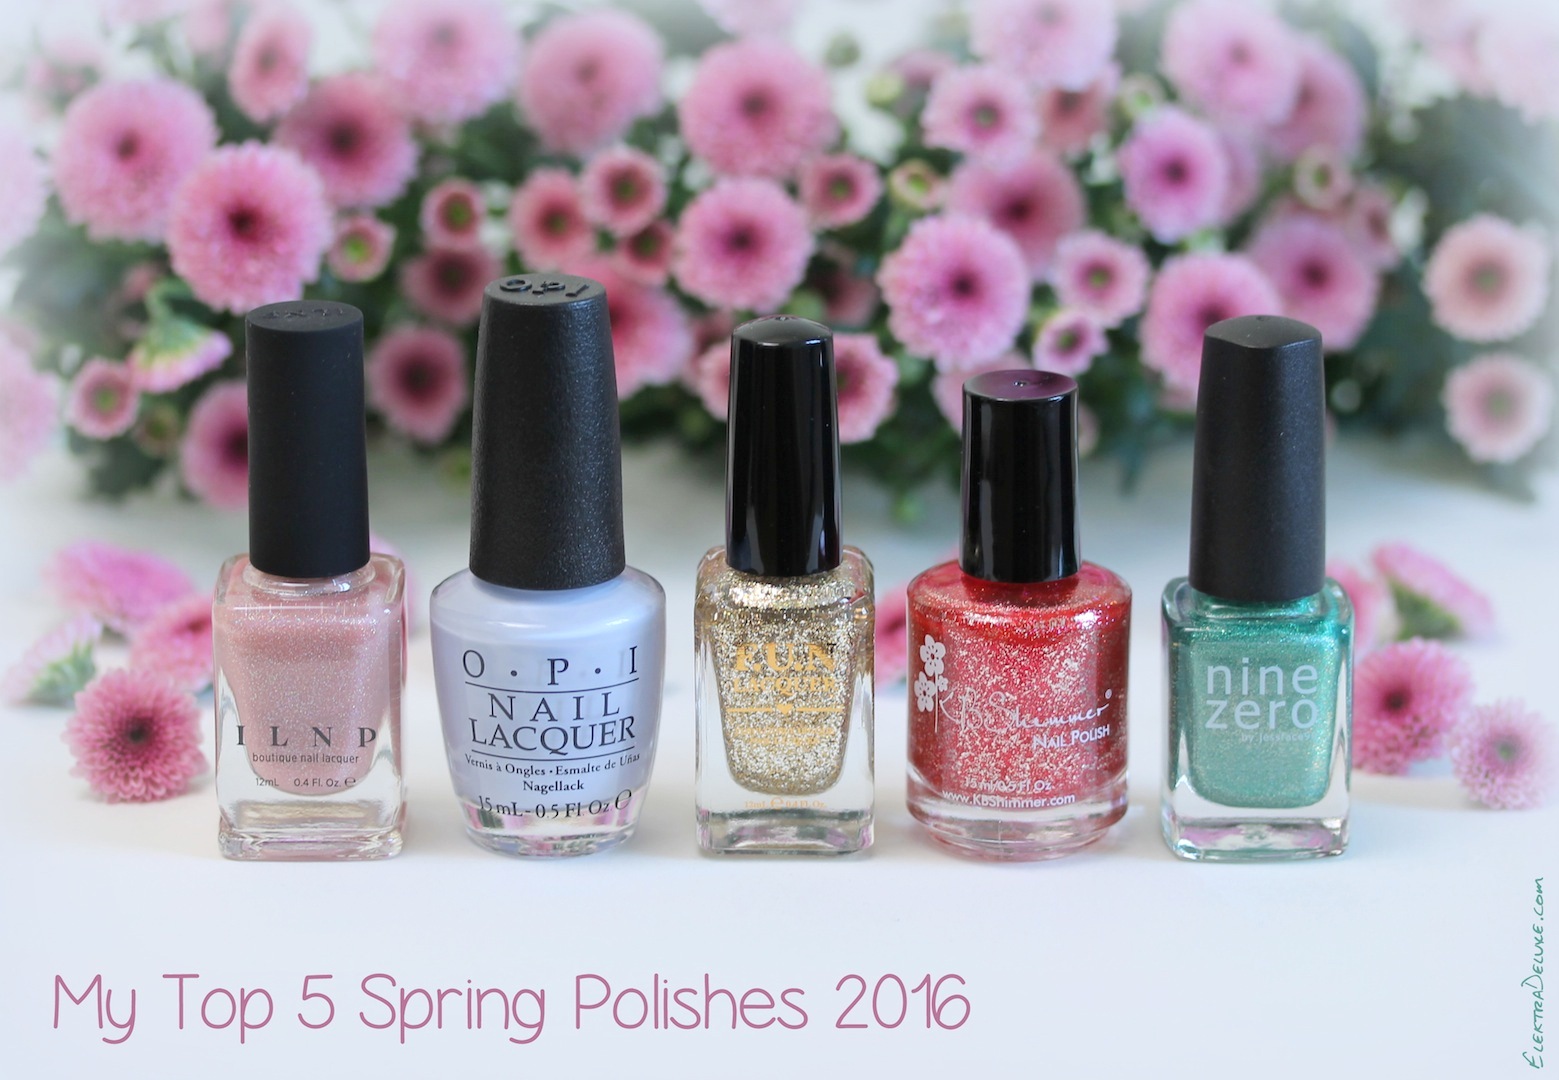 My Top Five Spring Polishes 2016: ILNP Sweet Pea, OPI I Am What I Amethyst, FUN Lacquer King, KBShimmer Ruby, Nine Zero Lacquer March 2016